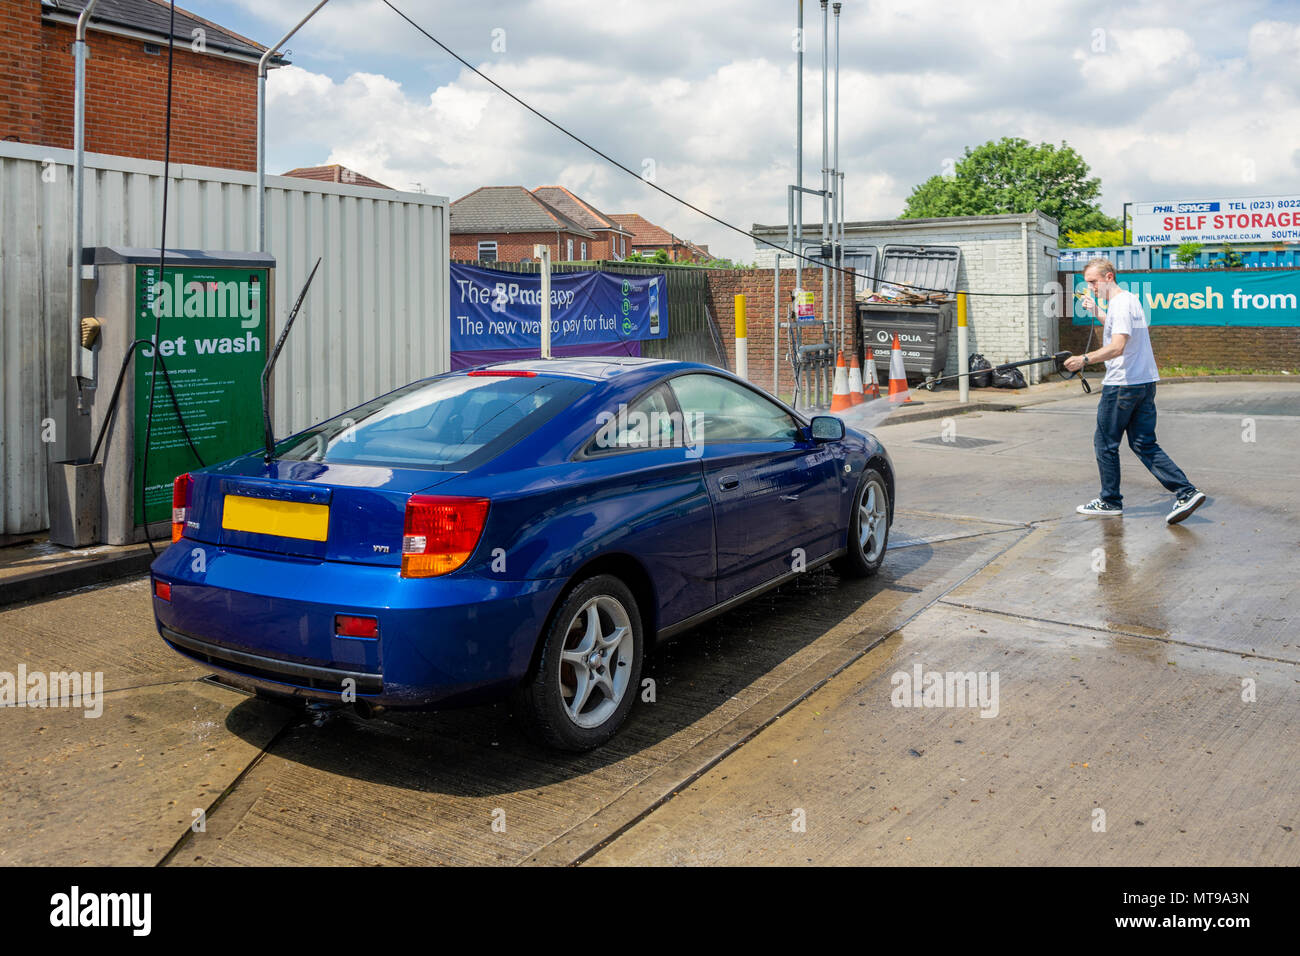 Male (age 30-40 years old) using a hand held jet wash pressure washer to clean a blue Toyata Celica car at a petrol station in the UK, Europe Stock Photo